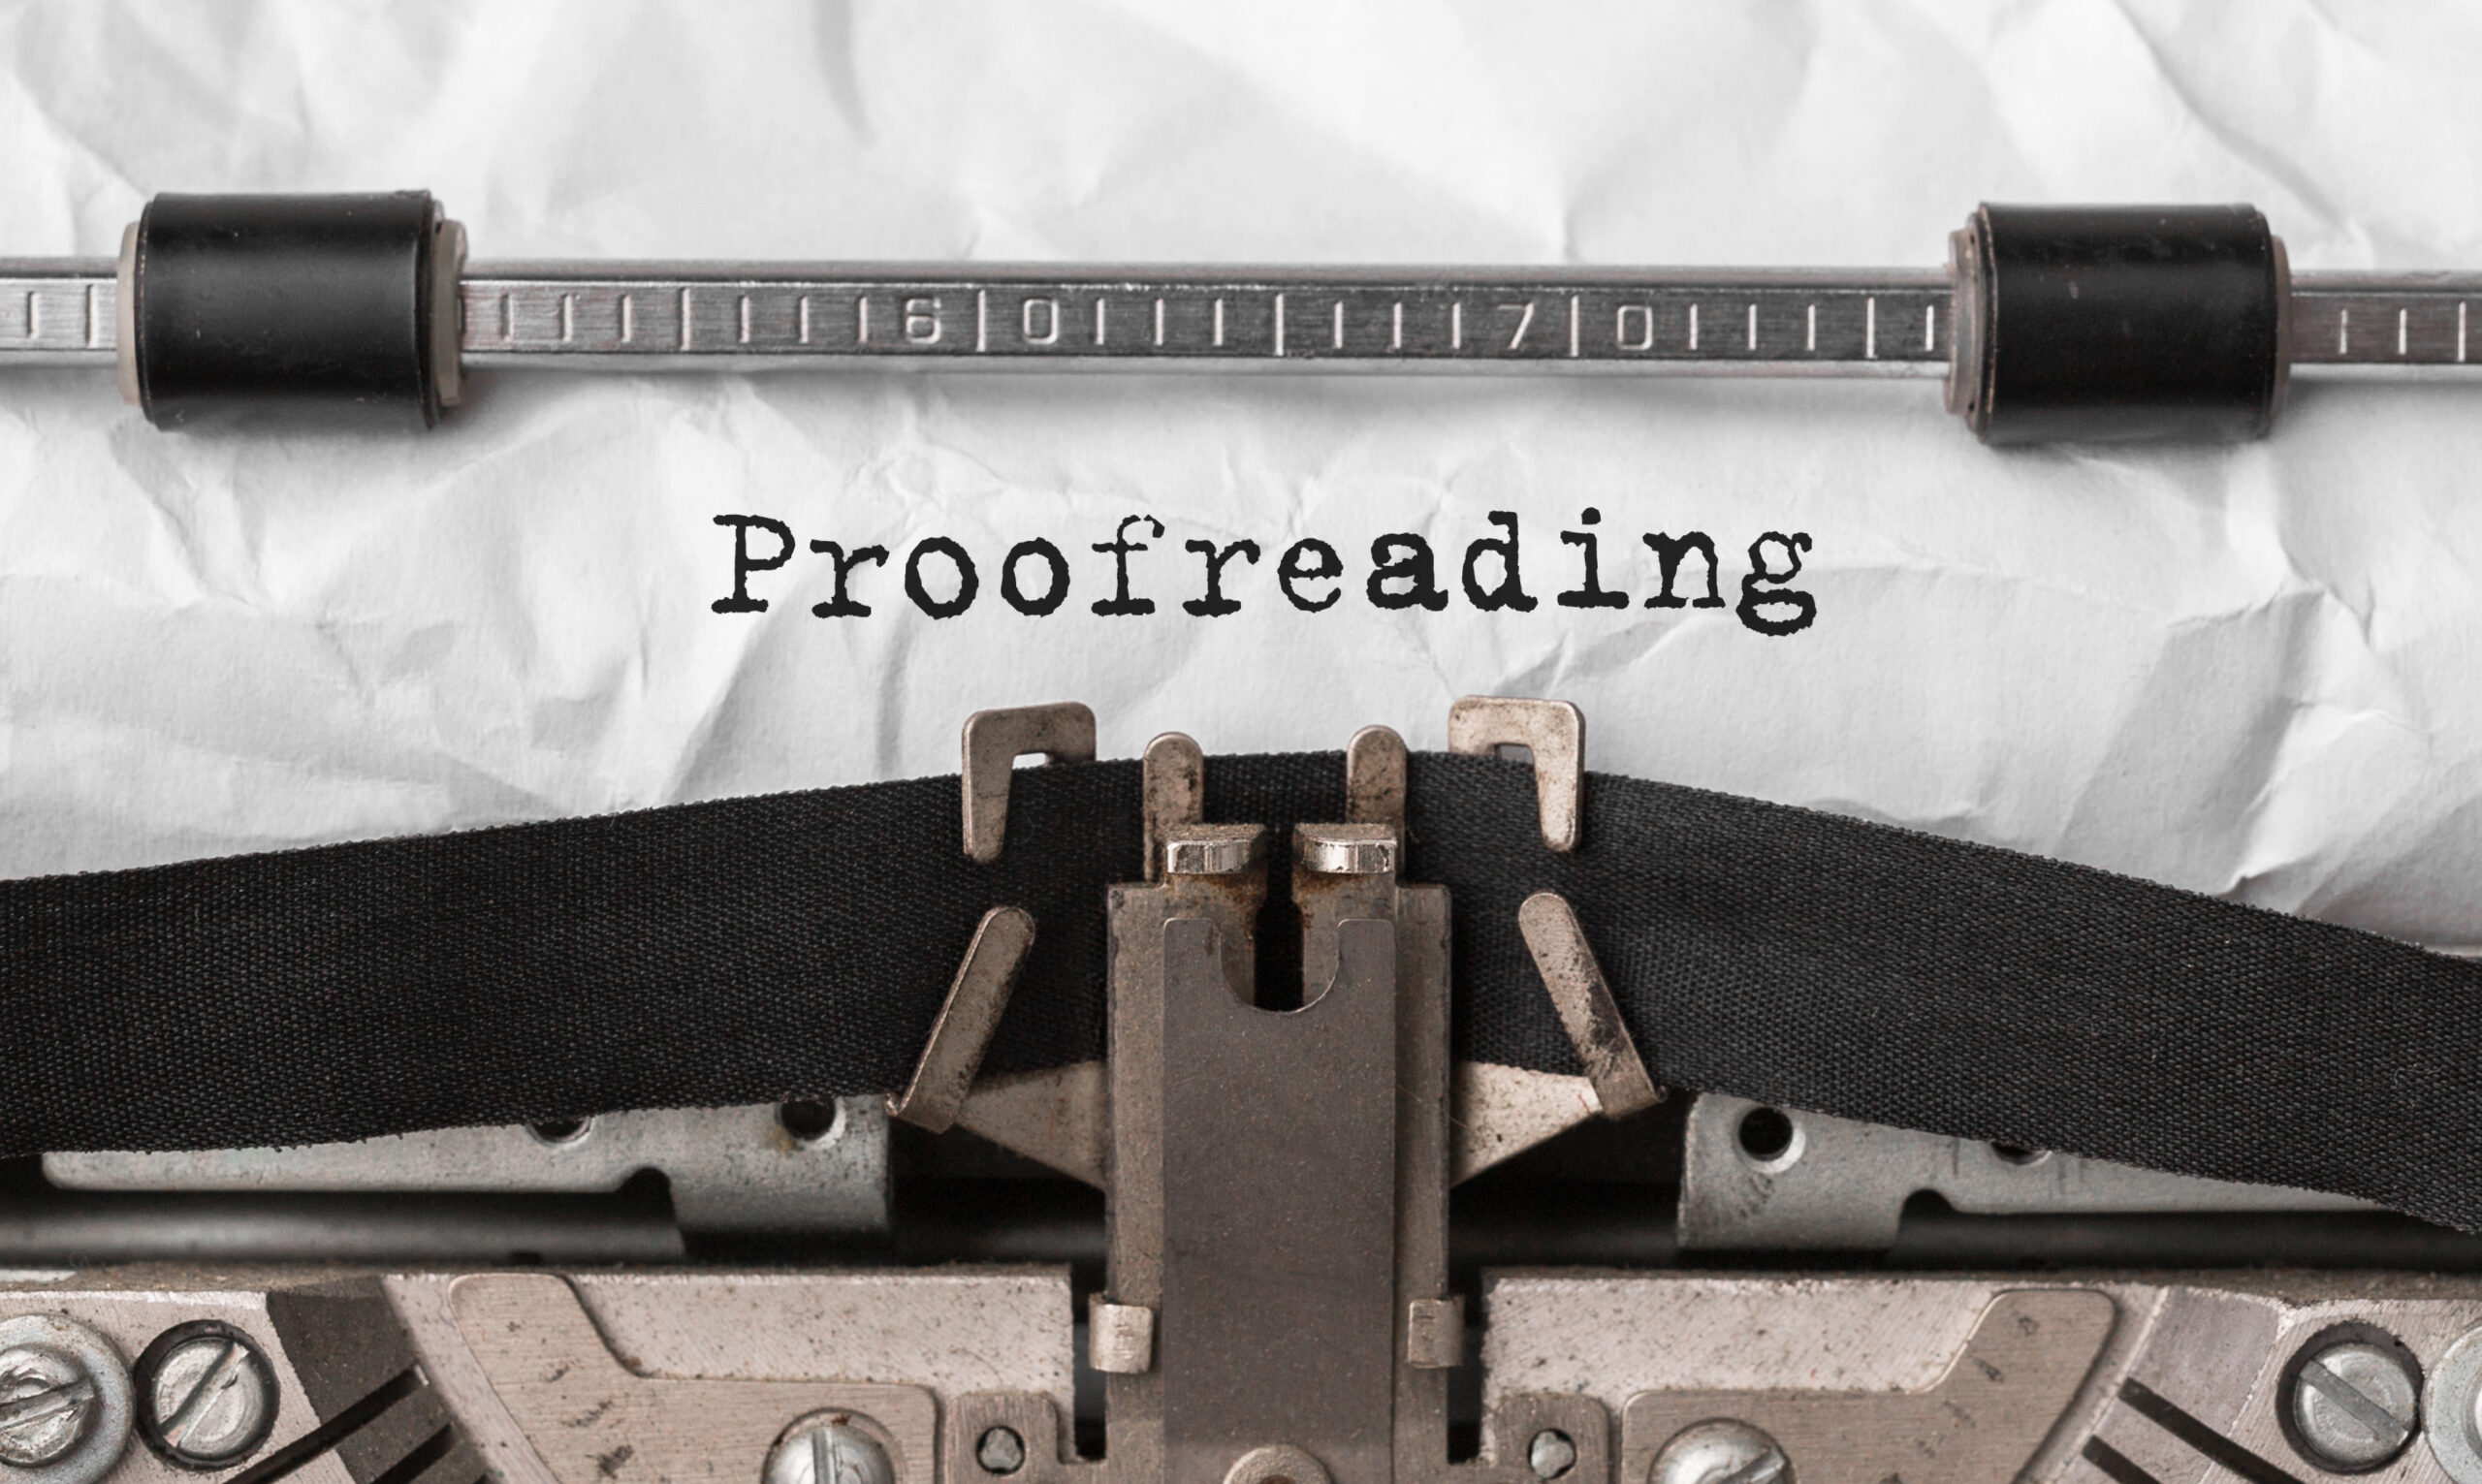 importance of patent proofreading and its benefits